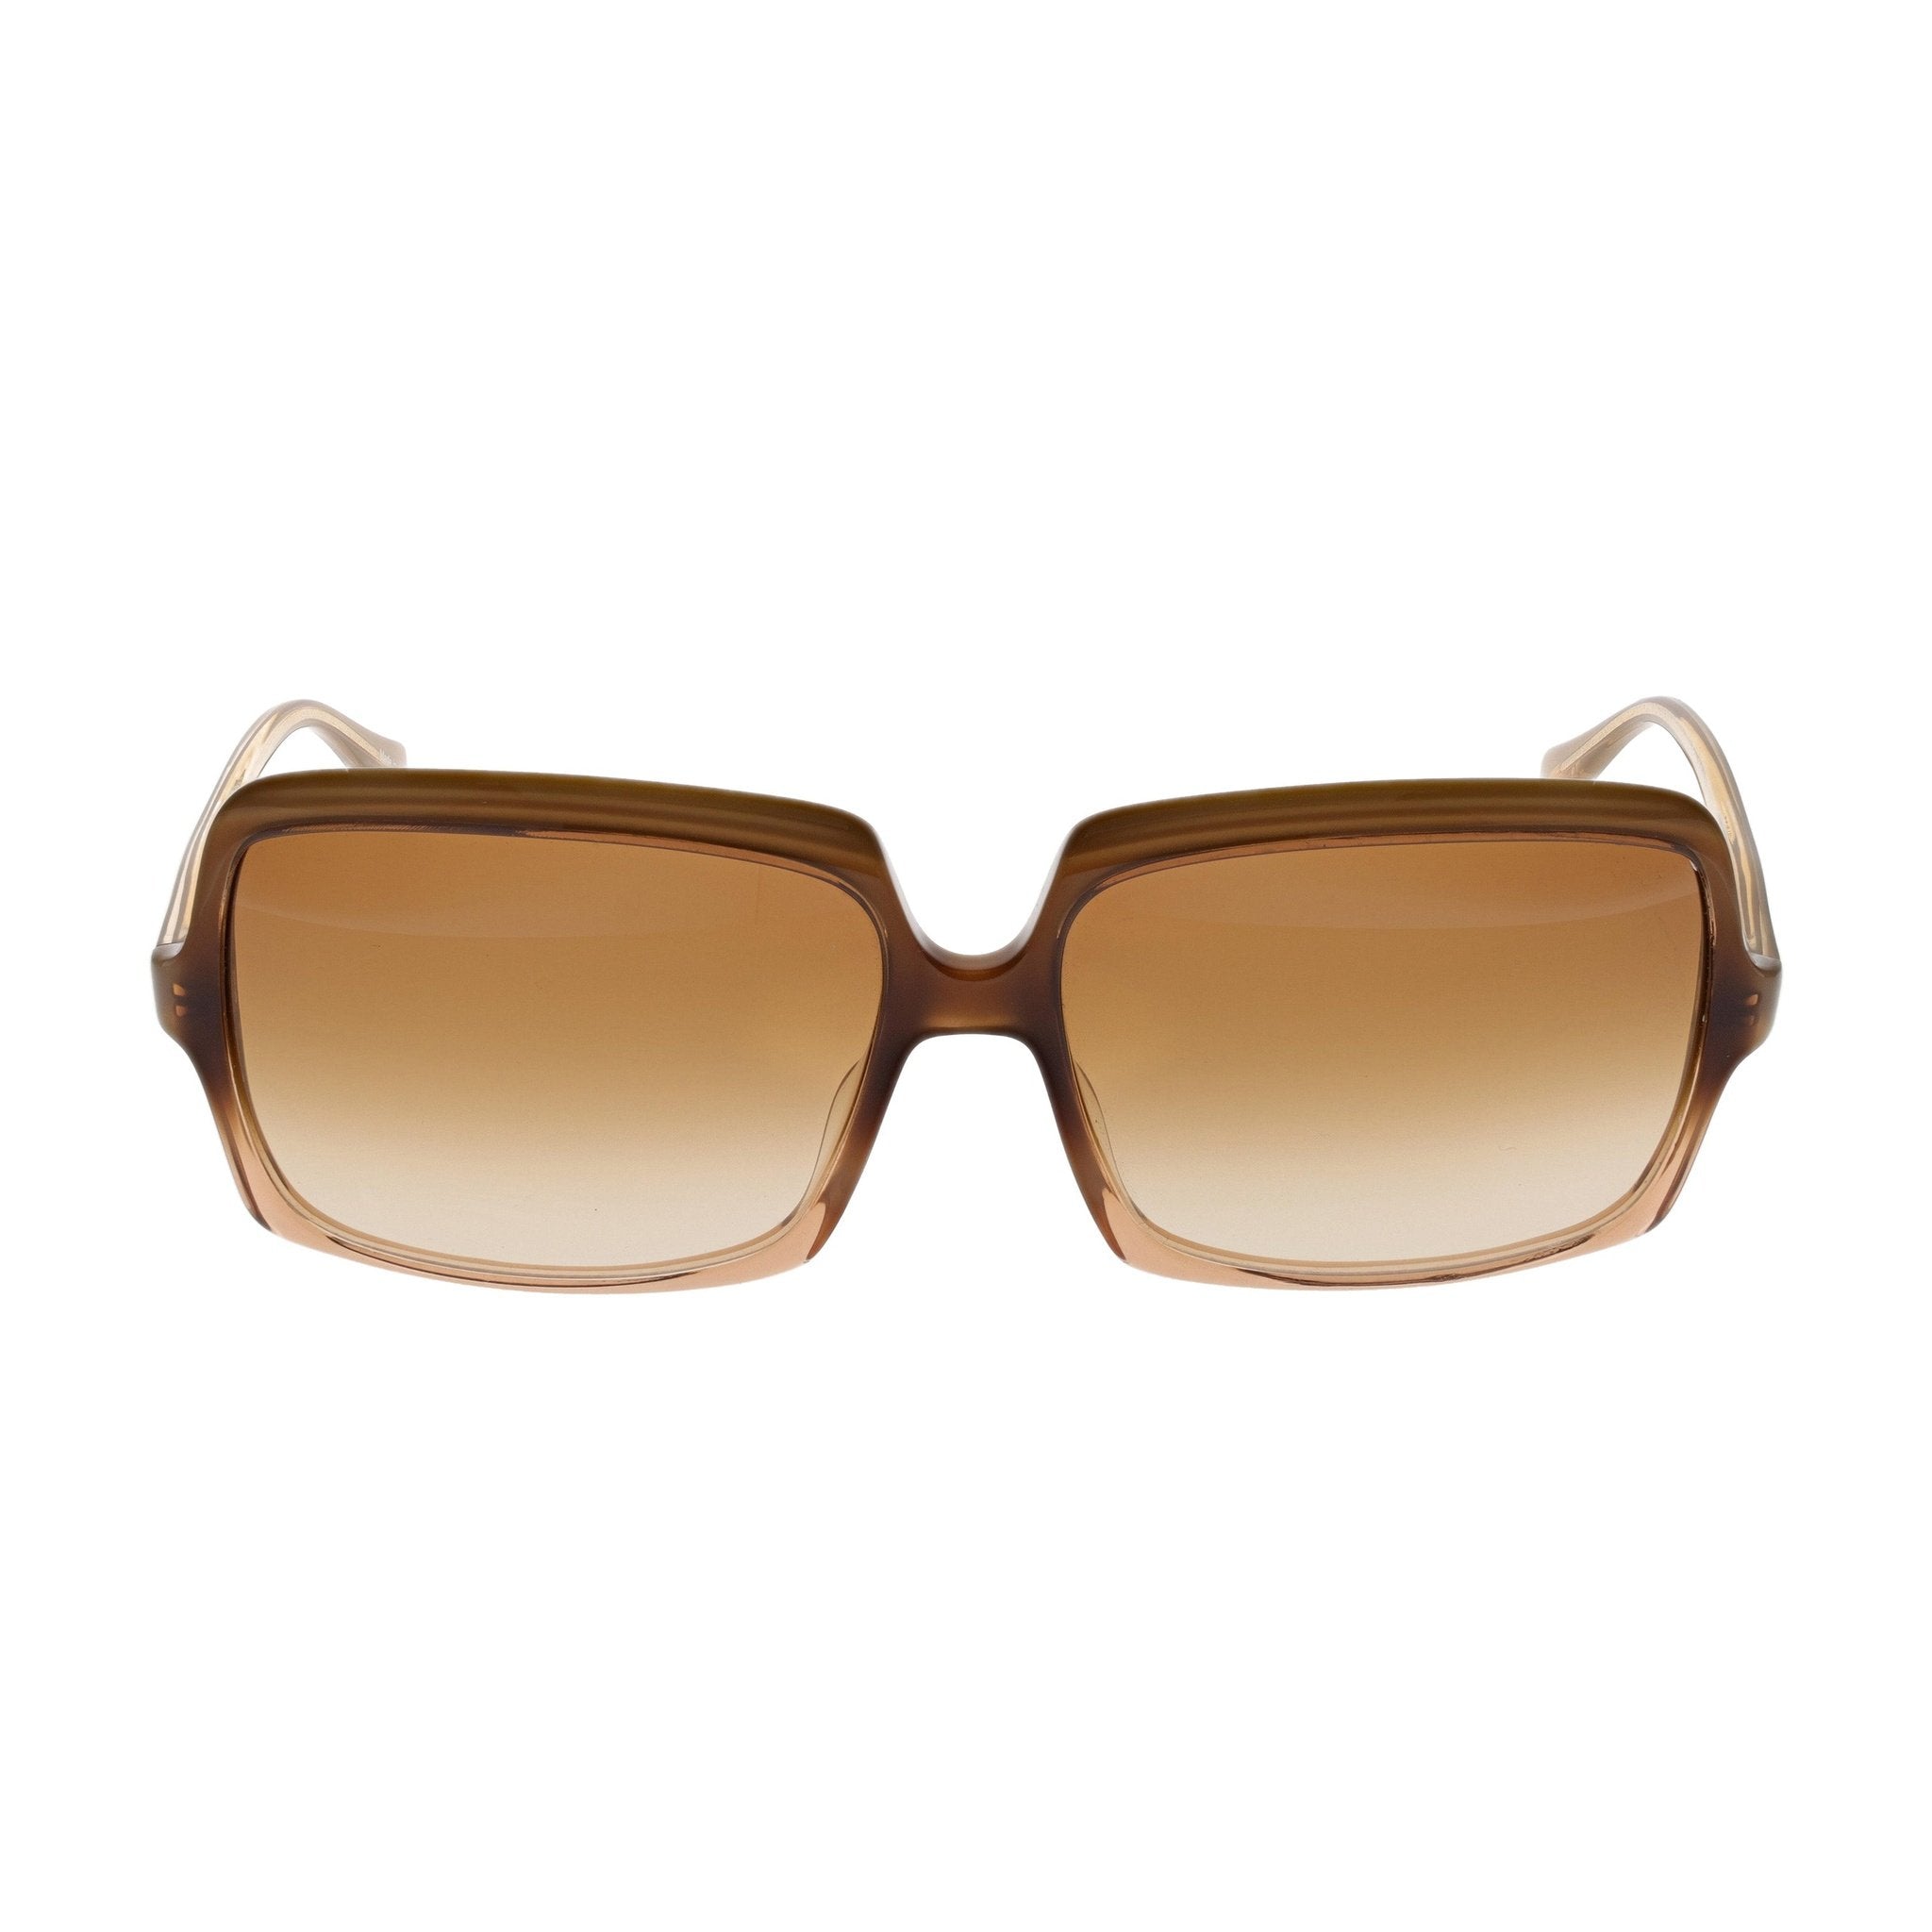 Oliver Peoples Apollonia Sunglasses